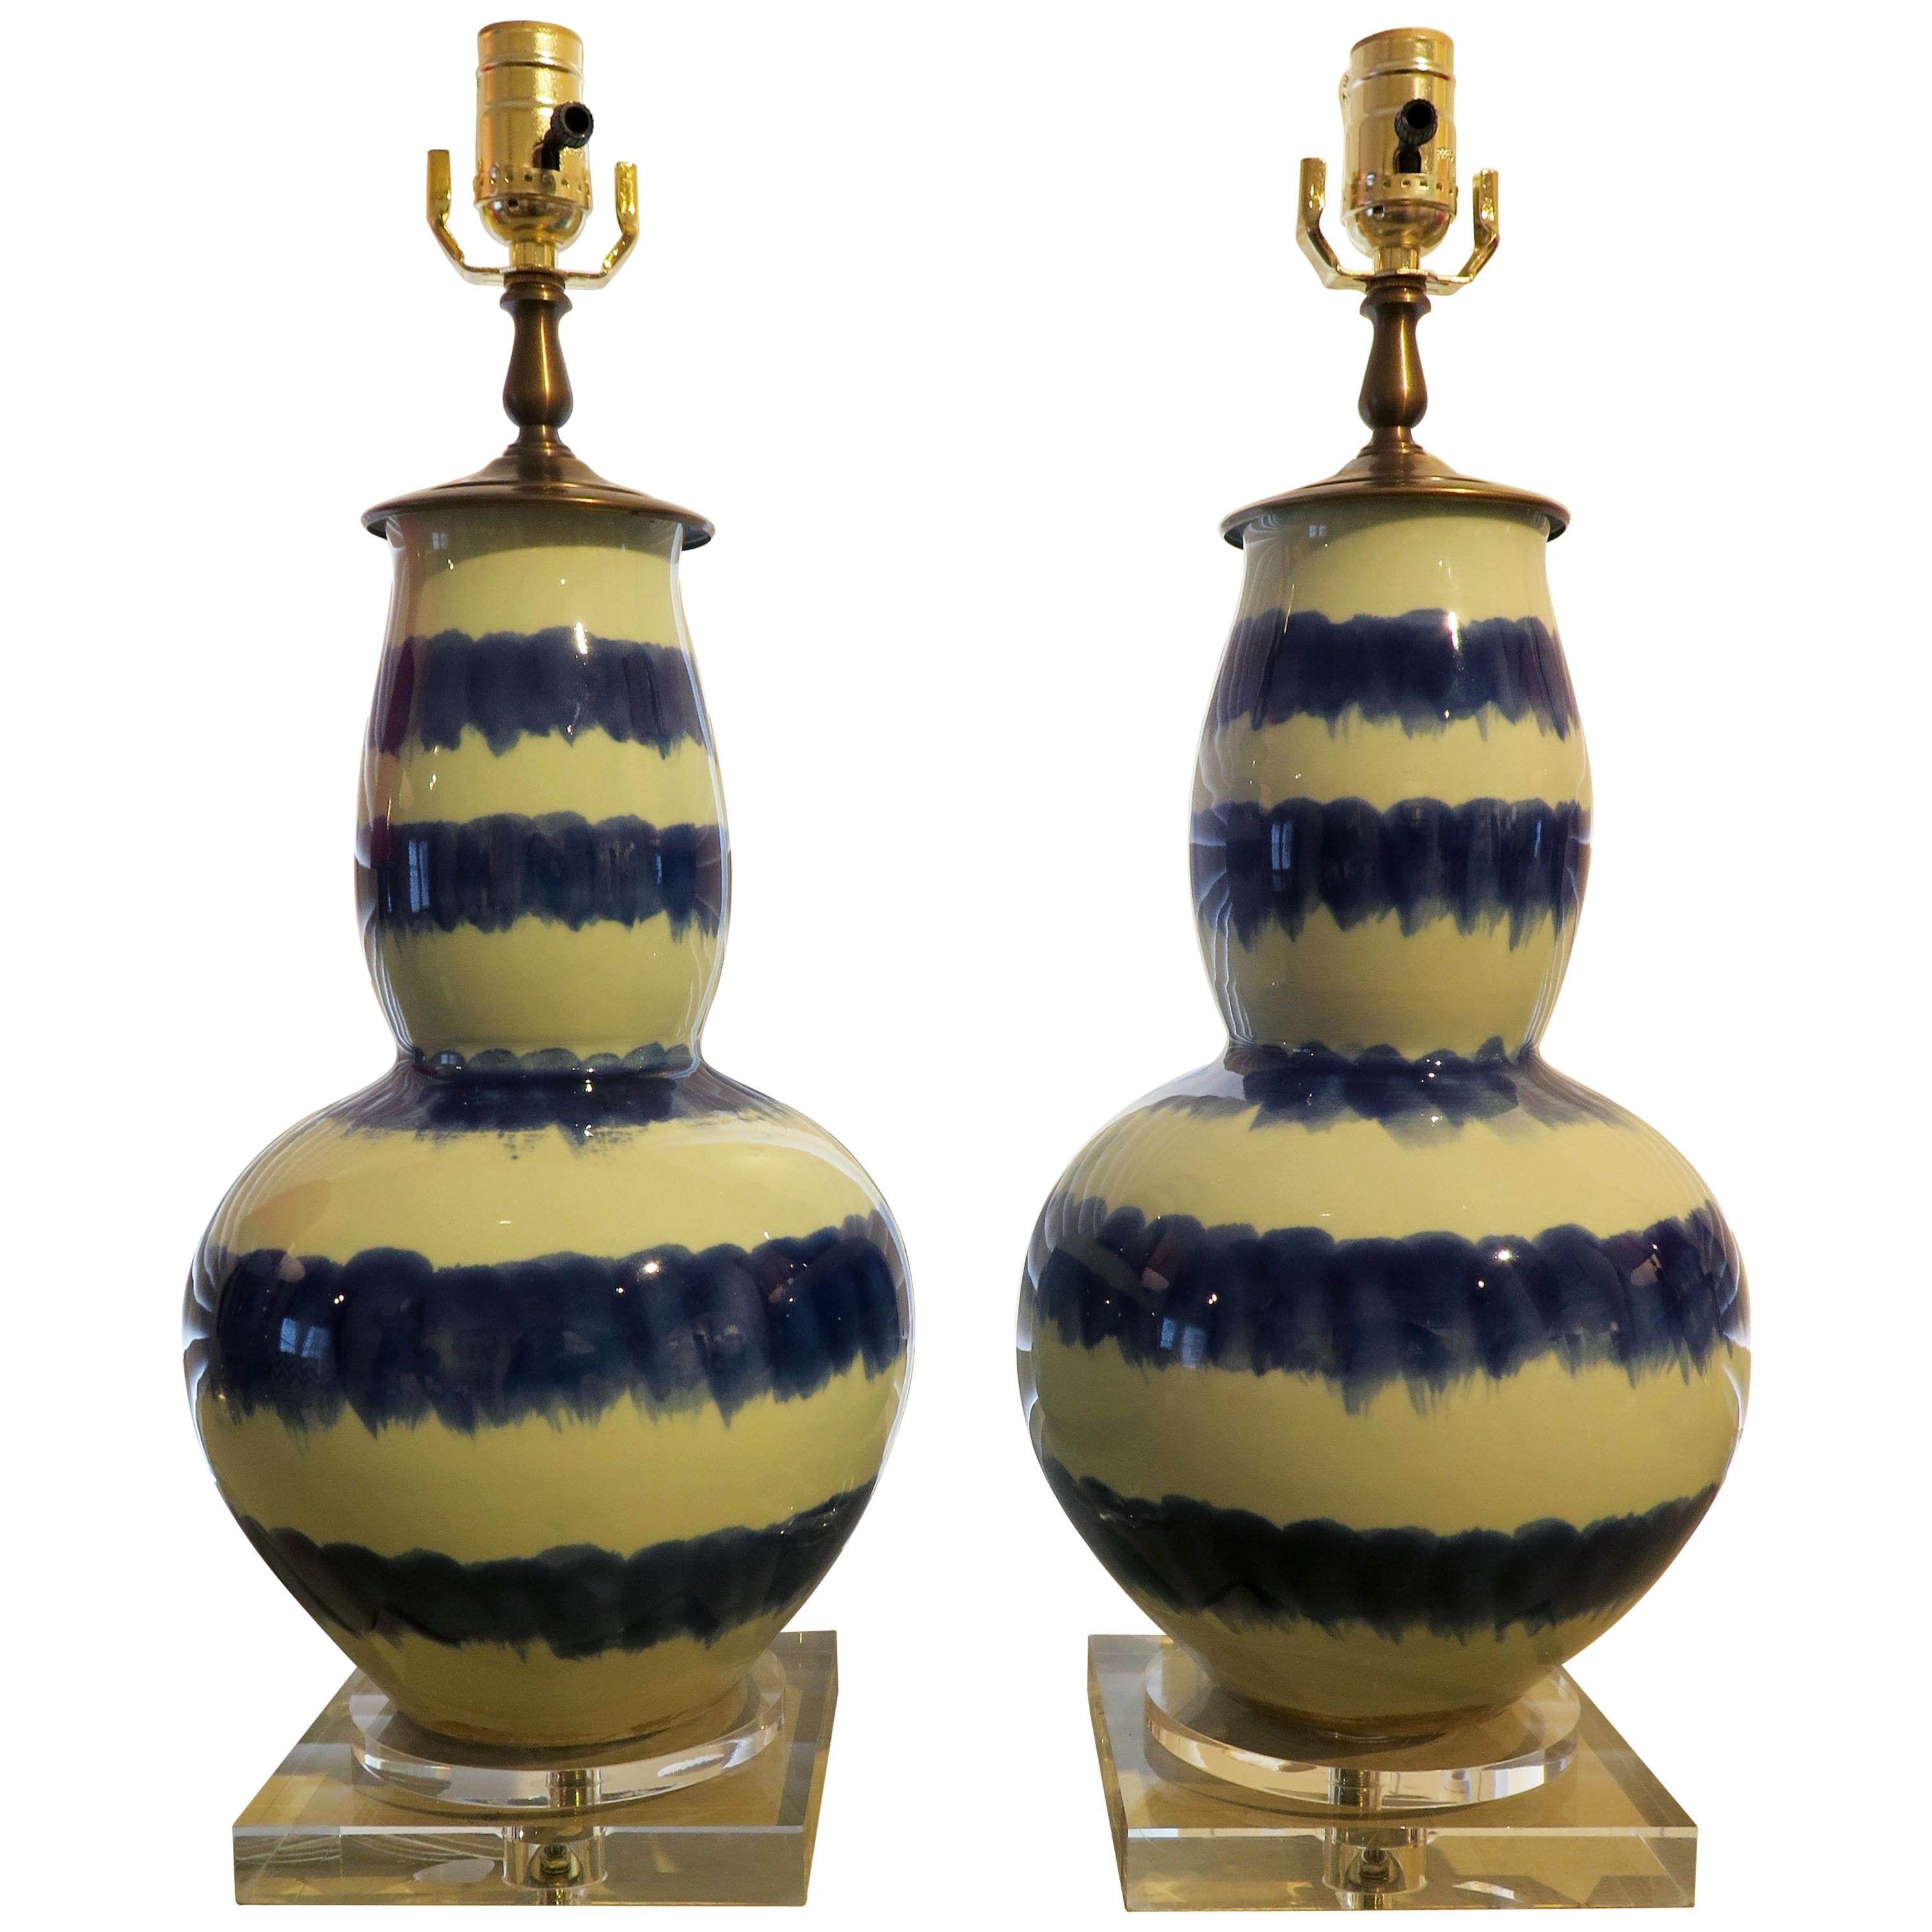 Pair of blue and celadon striped ceramic table lamps with clear acrylic bases. Lamps measure 19